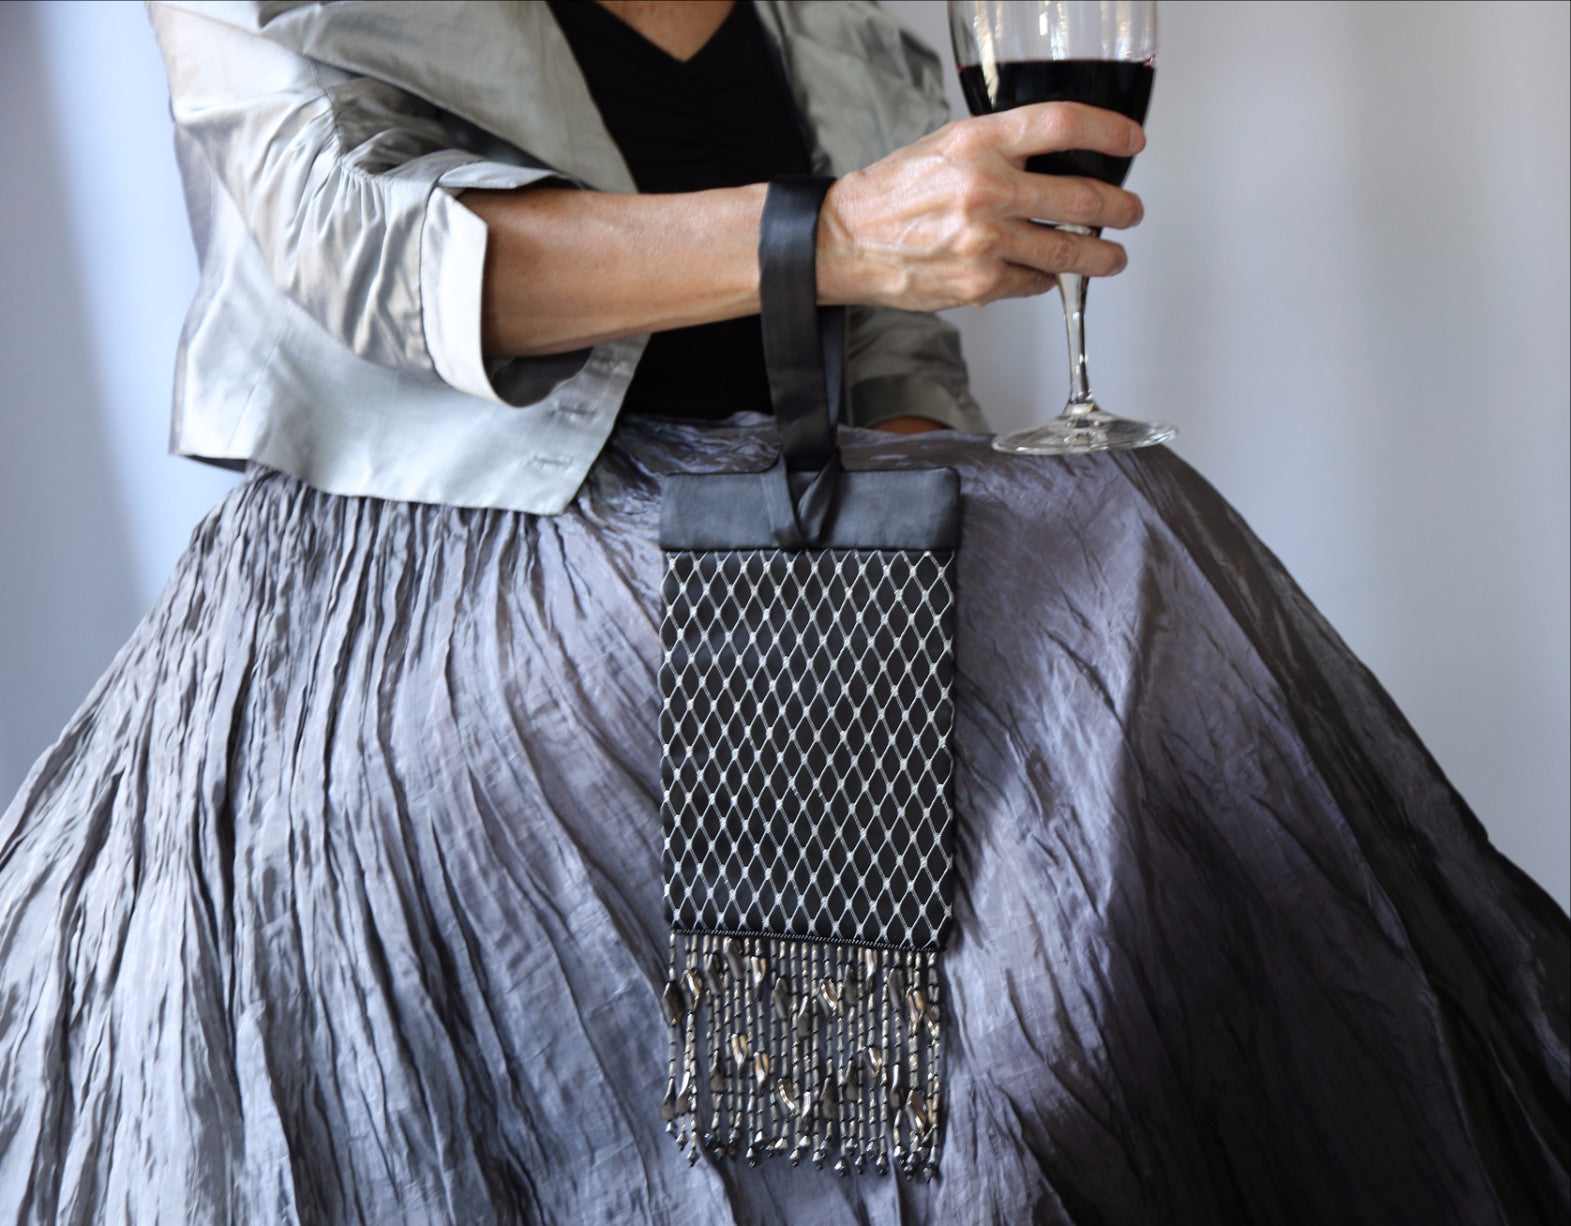 Black and Silver Evening Bag from Jenny Jag-Wear Design. The model demonstrates the functionality of this bag wearing the evening bag over her wrist, while easily holding a glass of wine. The Zara Collection by Jenny Jag-Wear Design.